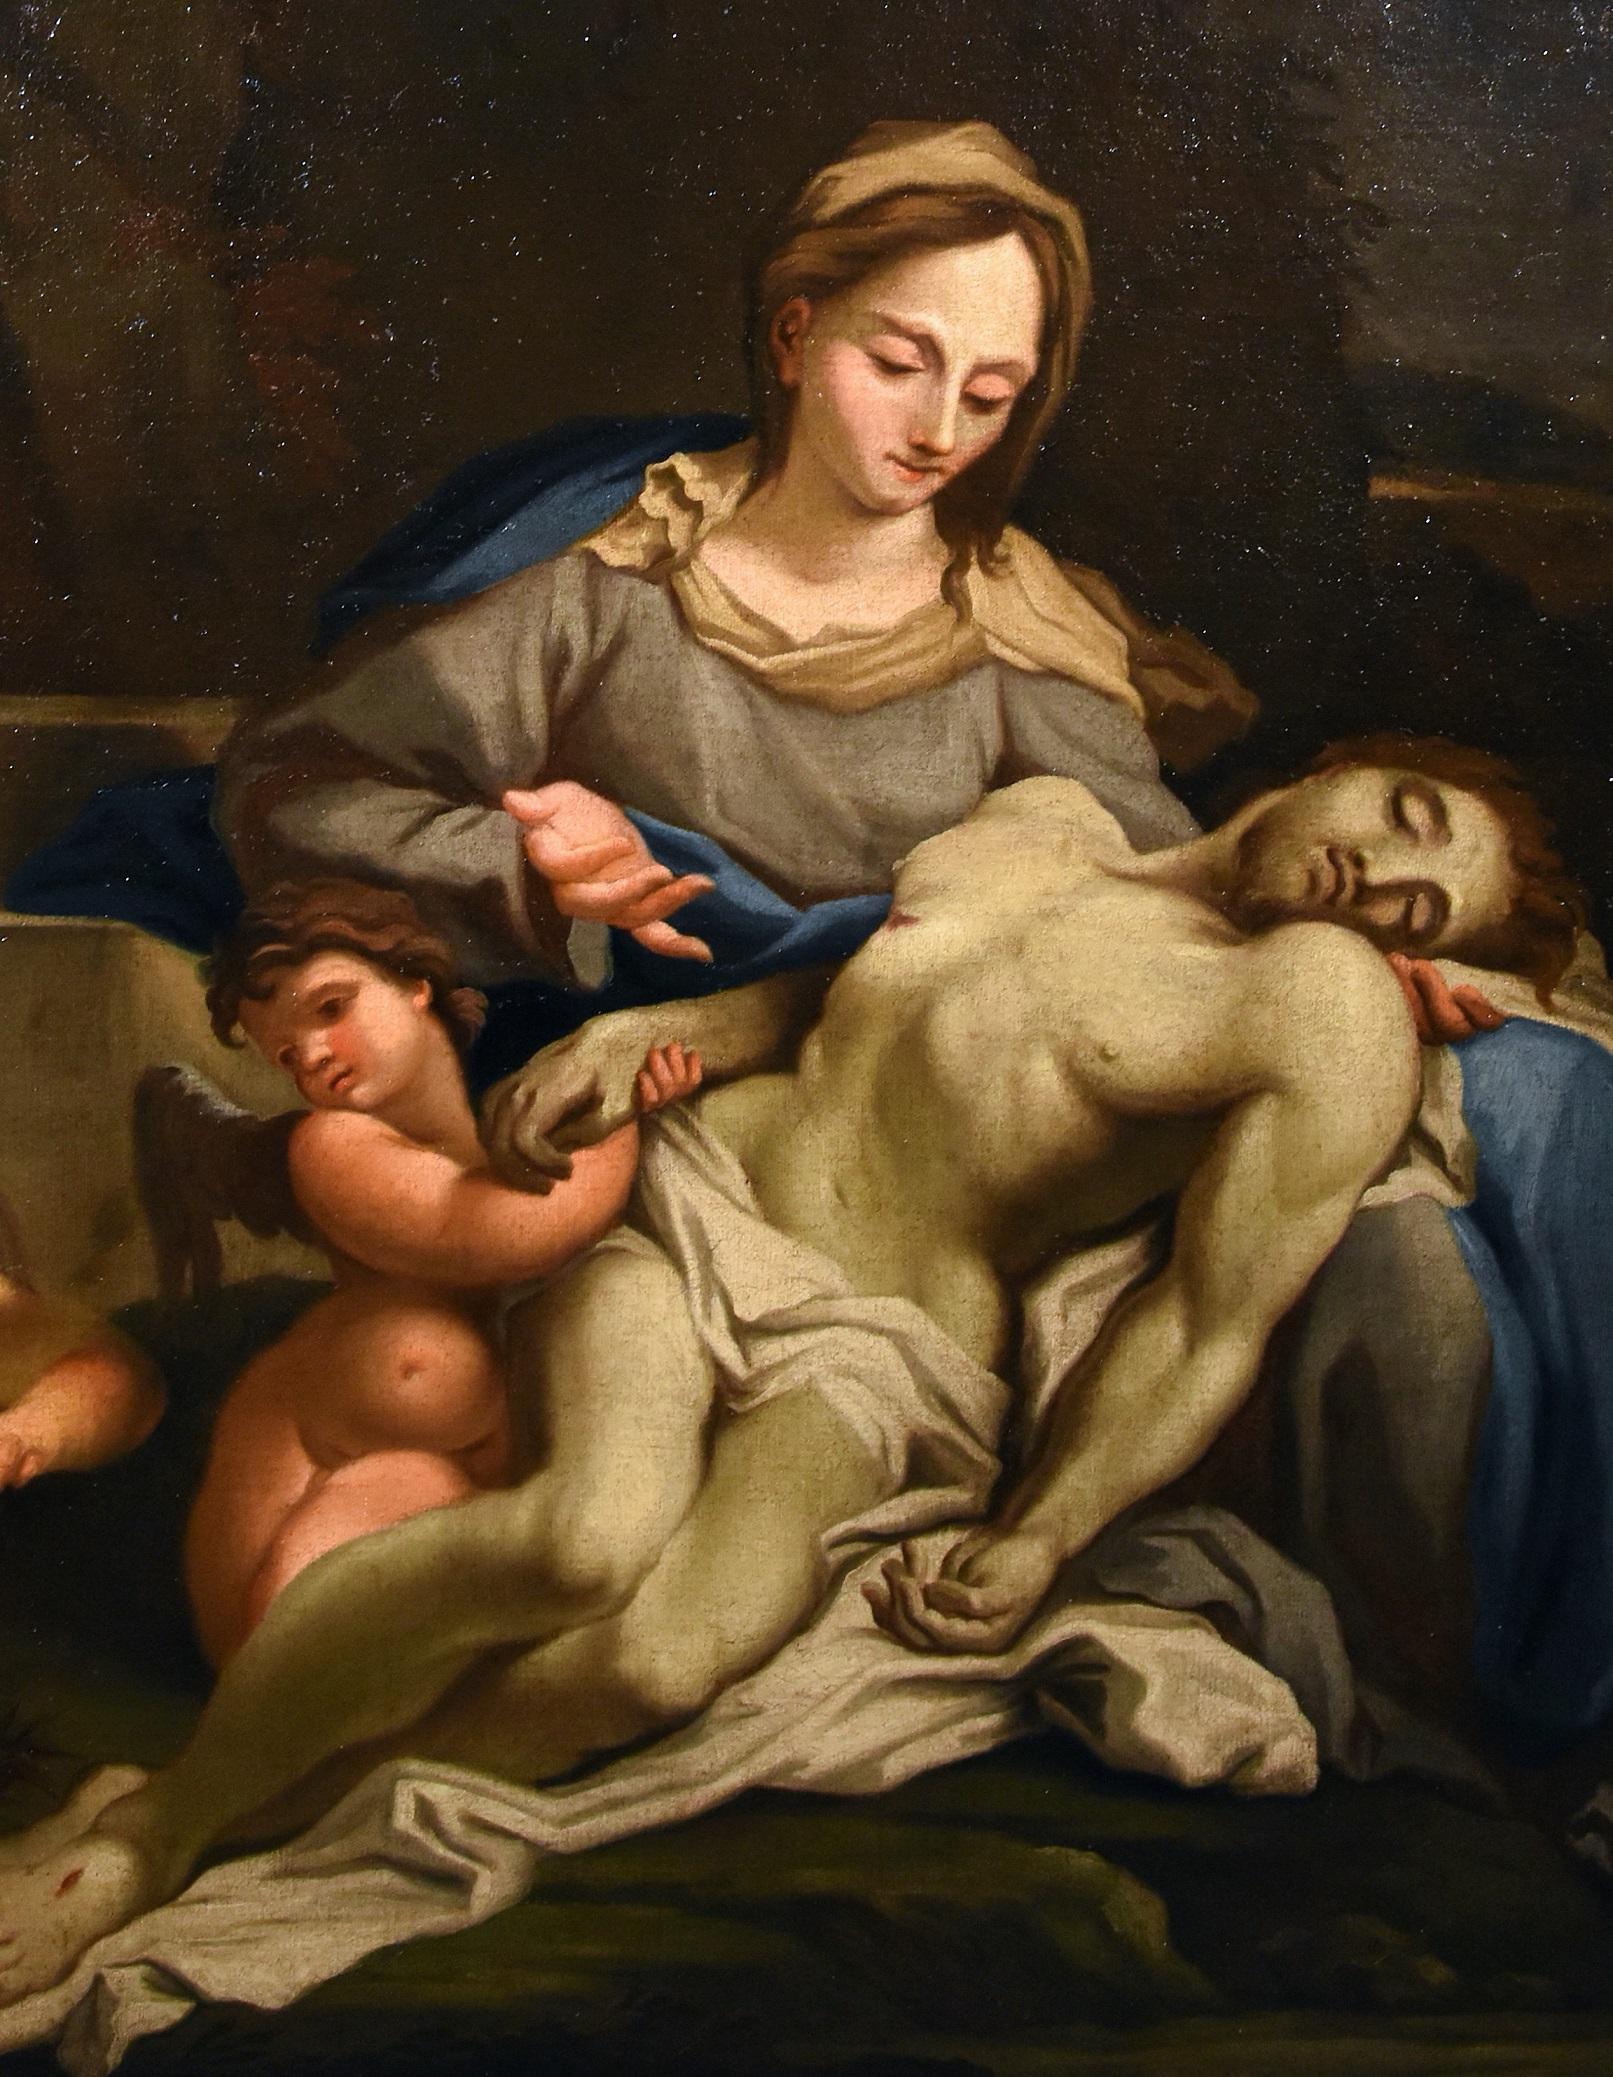 Pietà Trevisani Paint Oil on canvas Old master 18th century Italy Michelangelo - Painting by Francesco Trevisani (Capodistria 1656 - Rome 1746) 